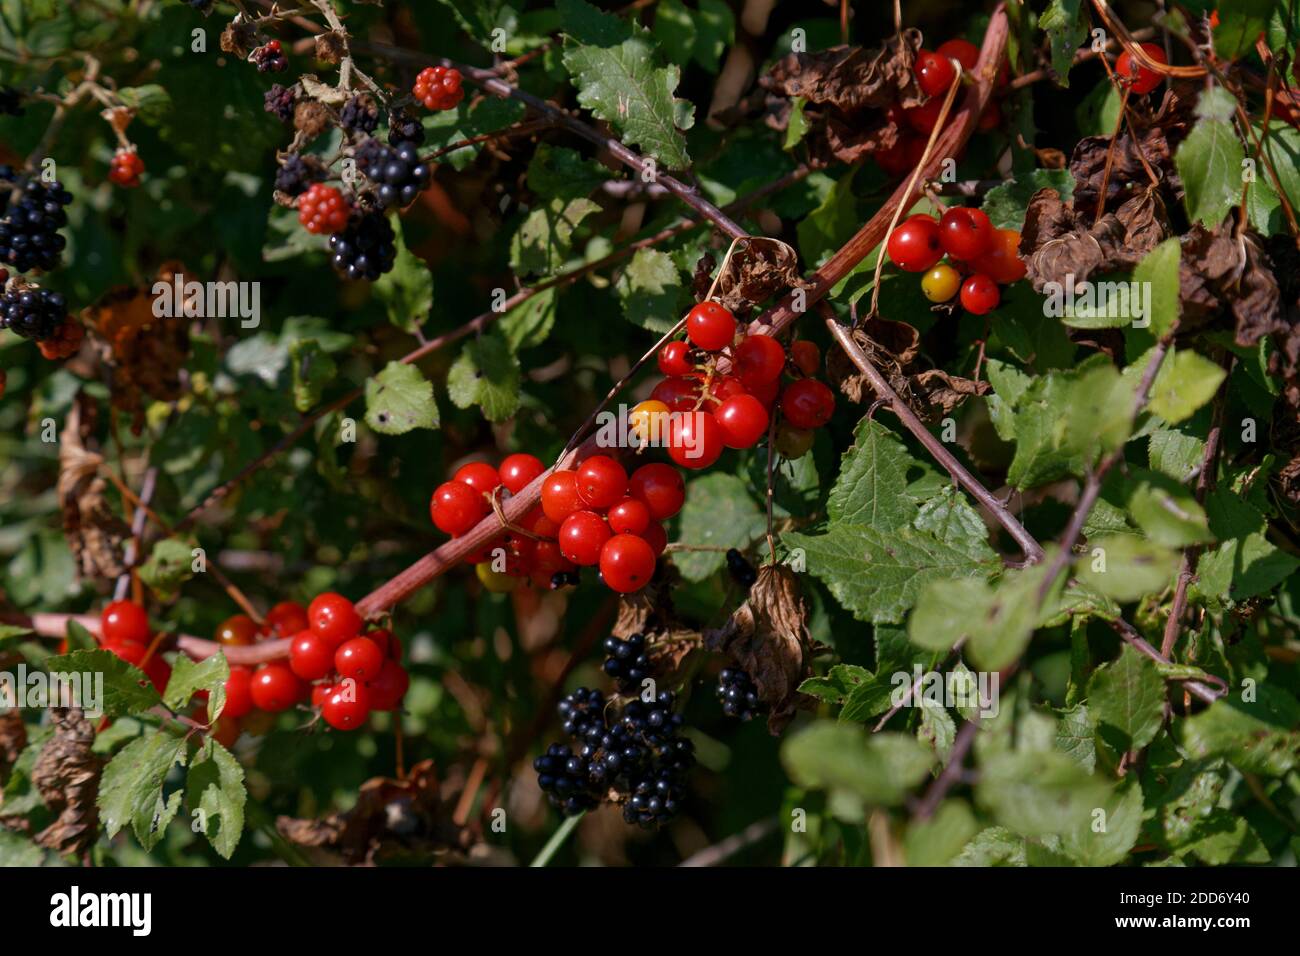 Red berries of the black bryony vine and blackberries in a hedgerow Dorset Stock Photo